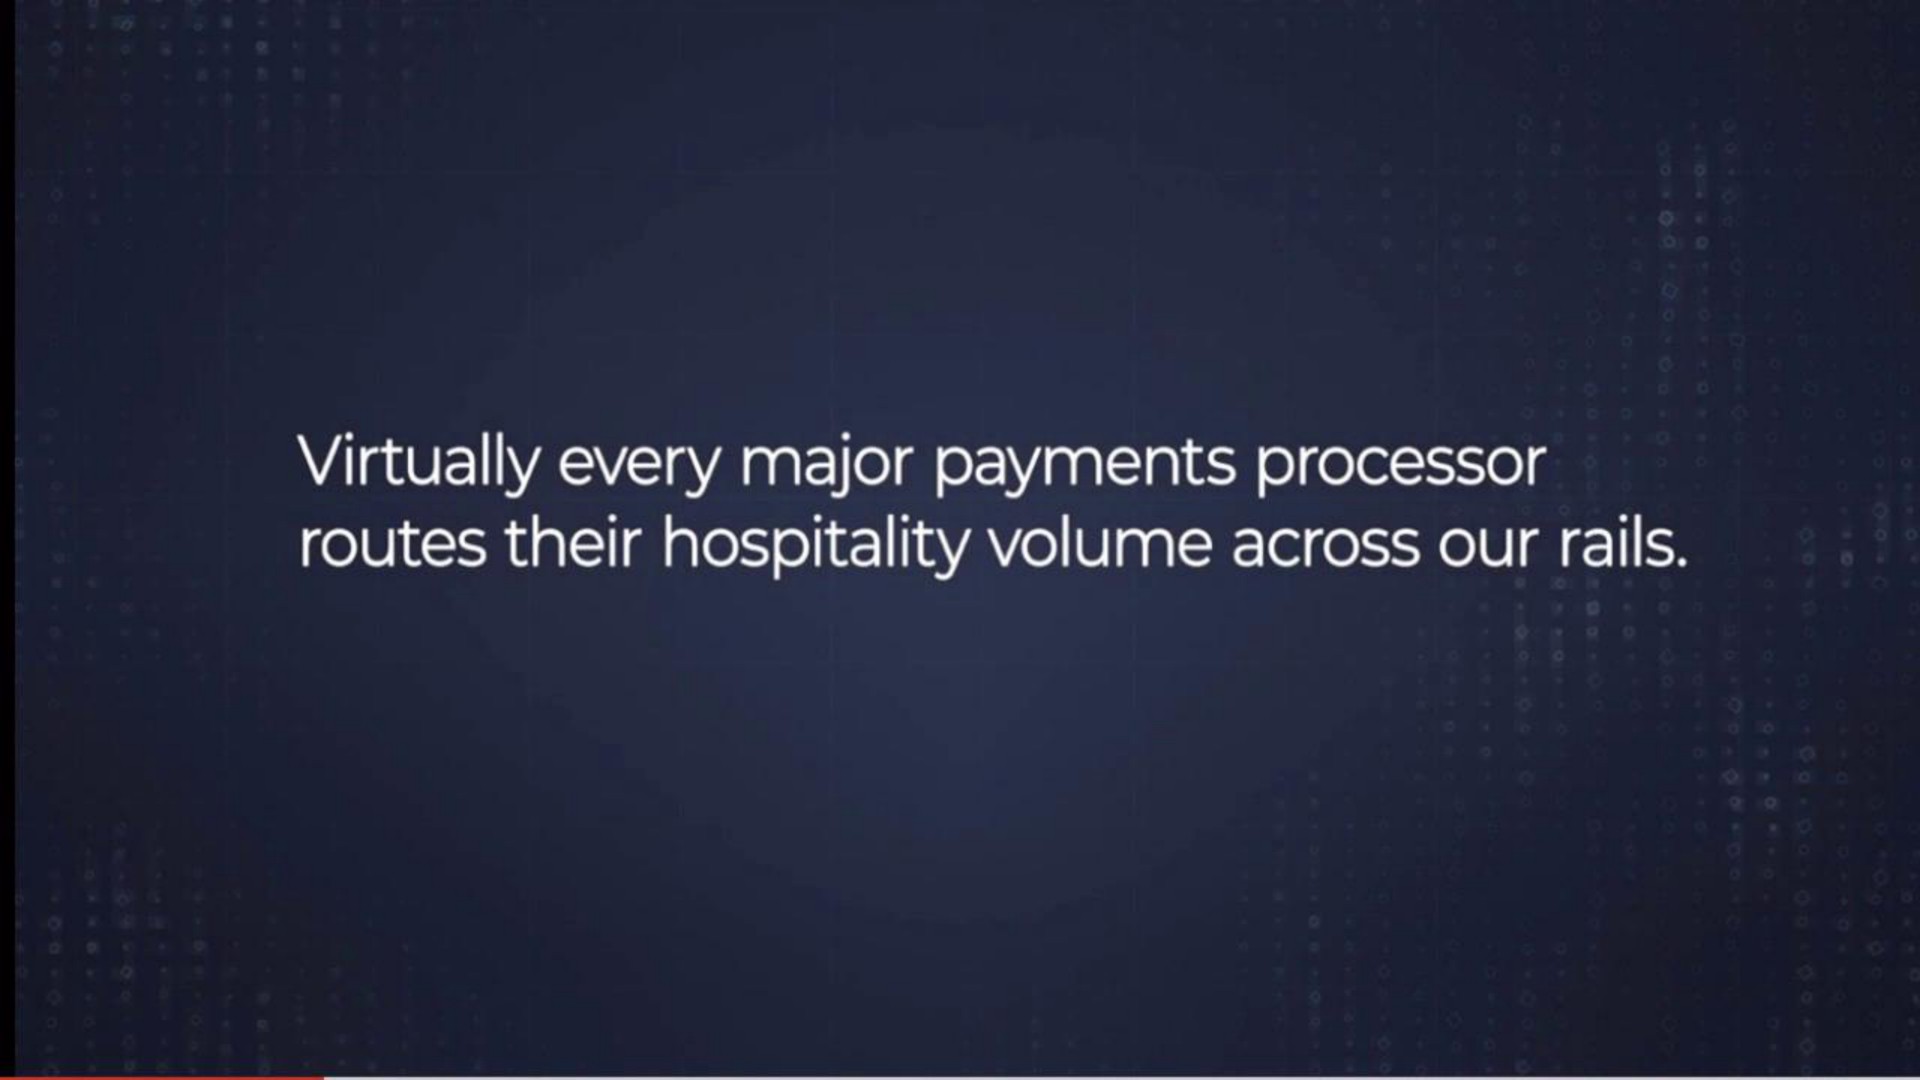 virtually every major payments processor routes their hospitality volume across our rails | Shift4